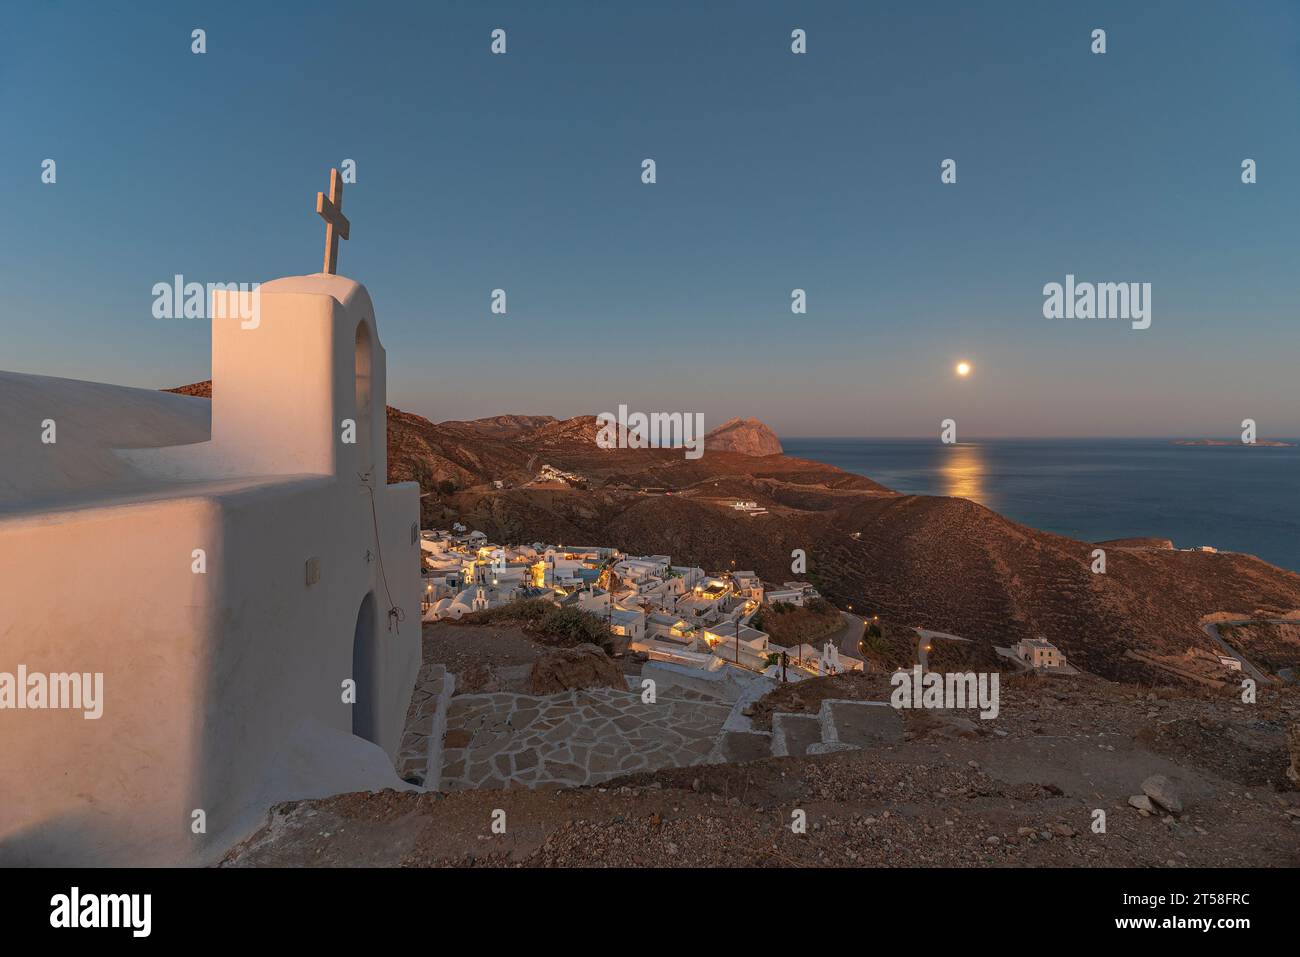 Panoramic view from the Venetian castle at moonrise, Anafi Stock Photo